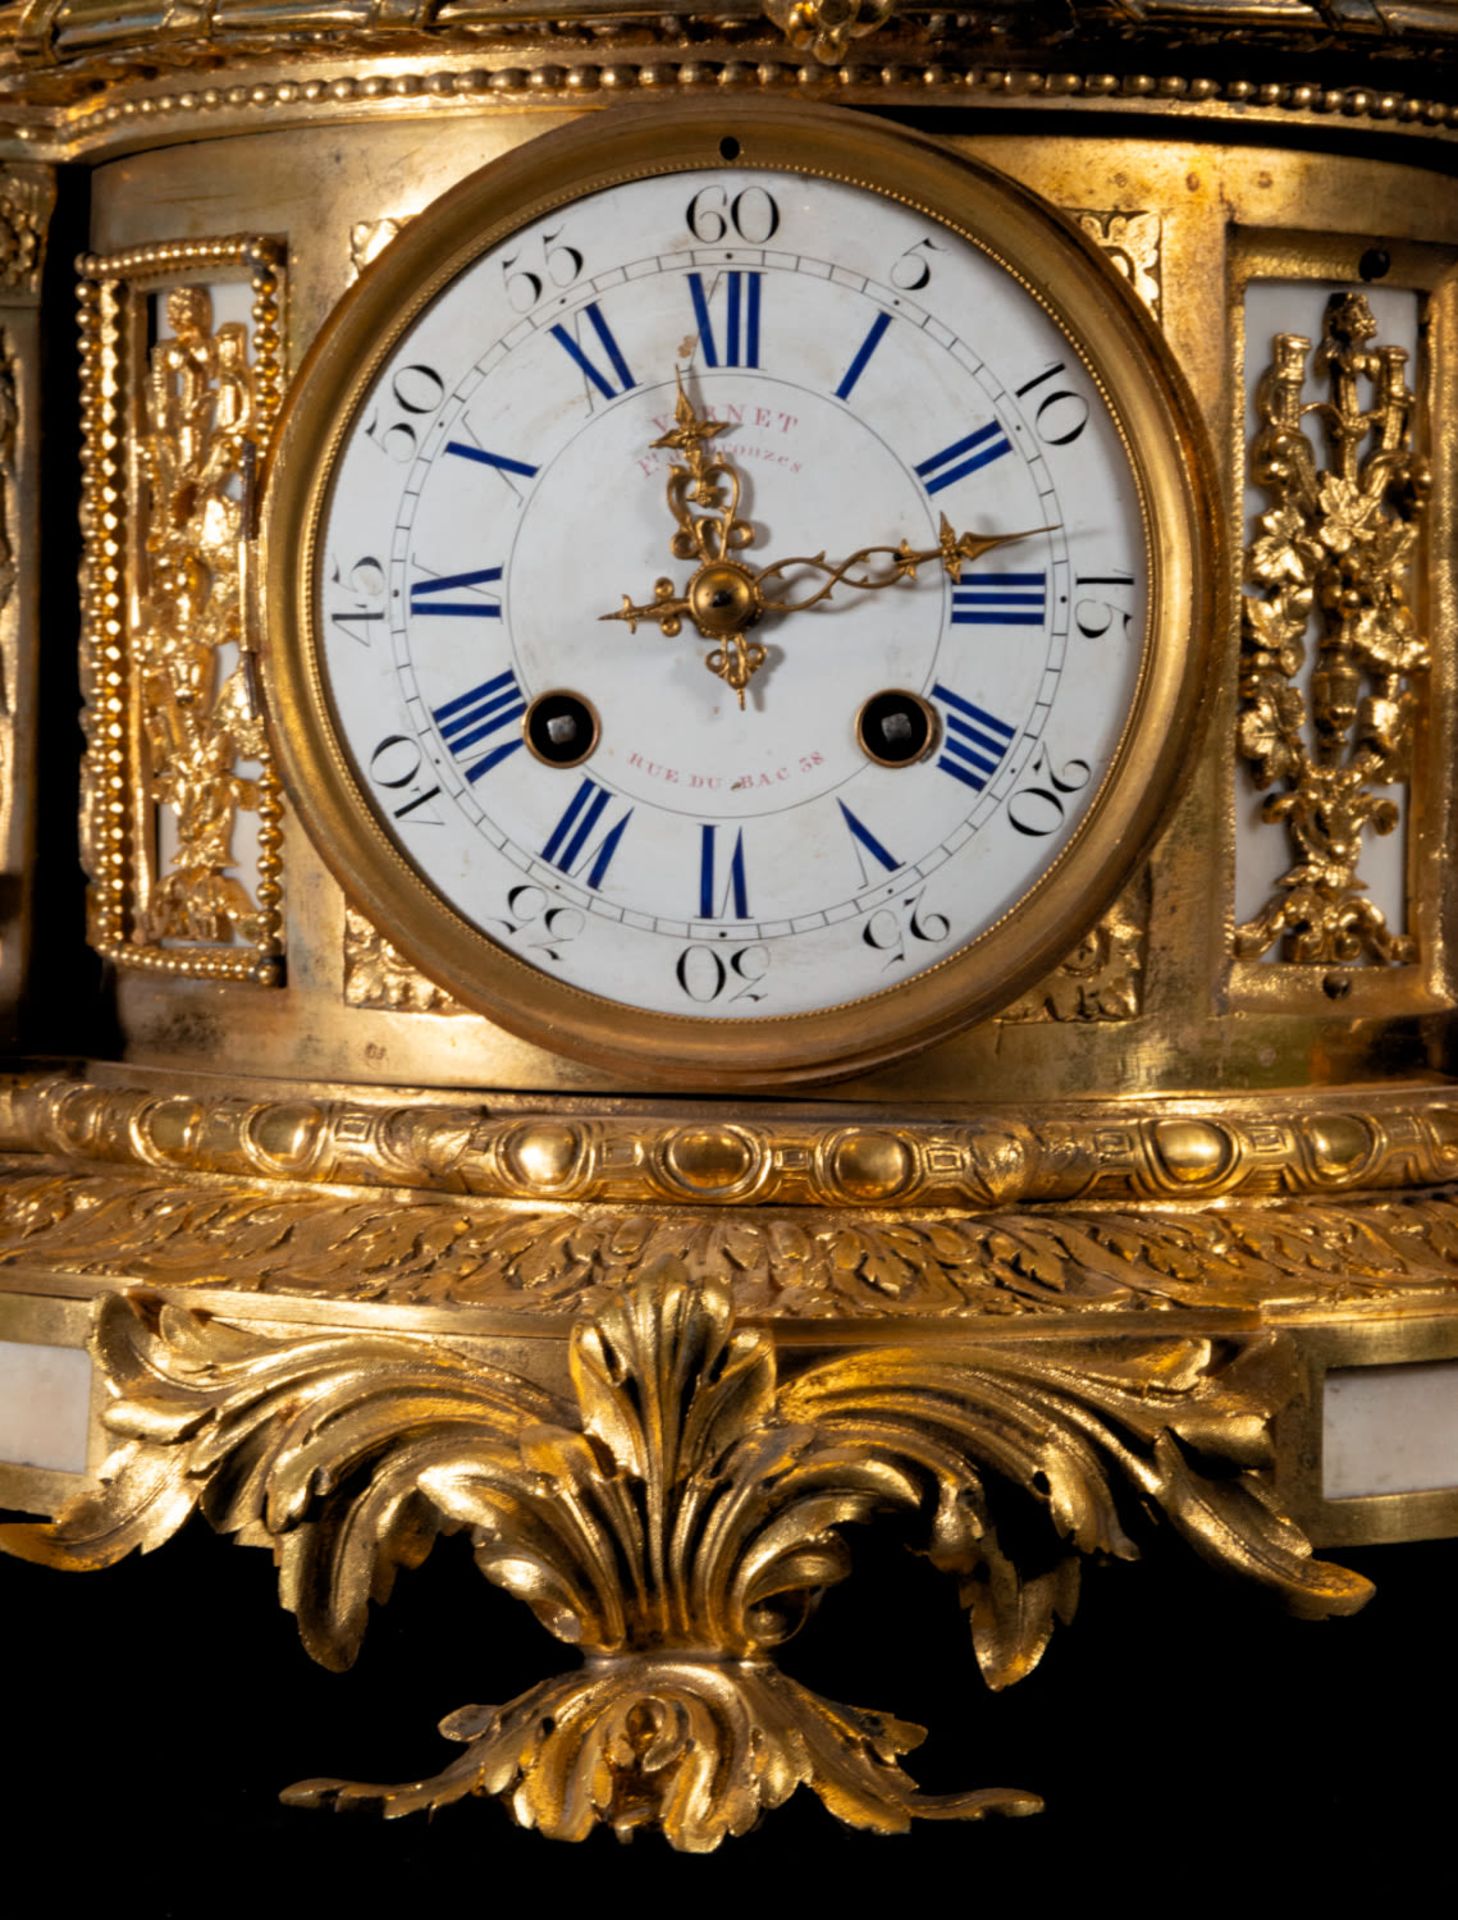 Exquisite Large French Table Clock in Mercury-Gilded Bronze and Alabaster with Bacchus and Goat, Nap - Image 4 of 9